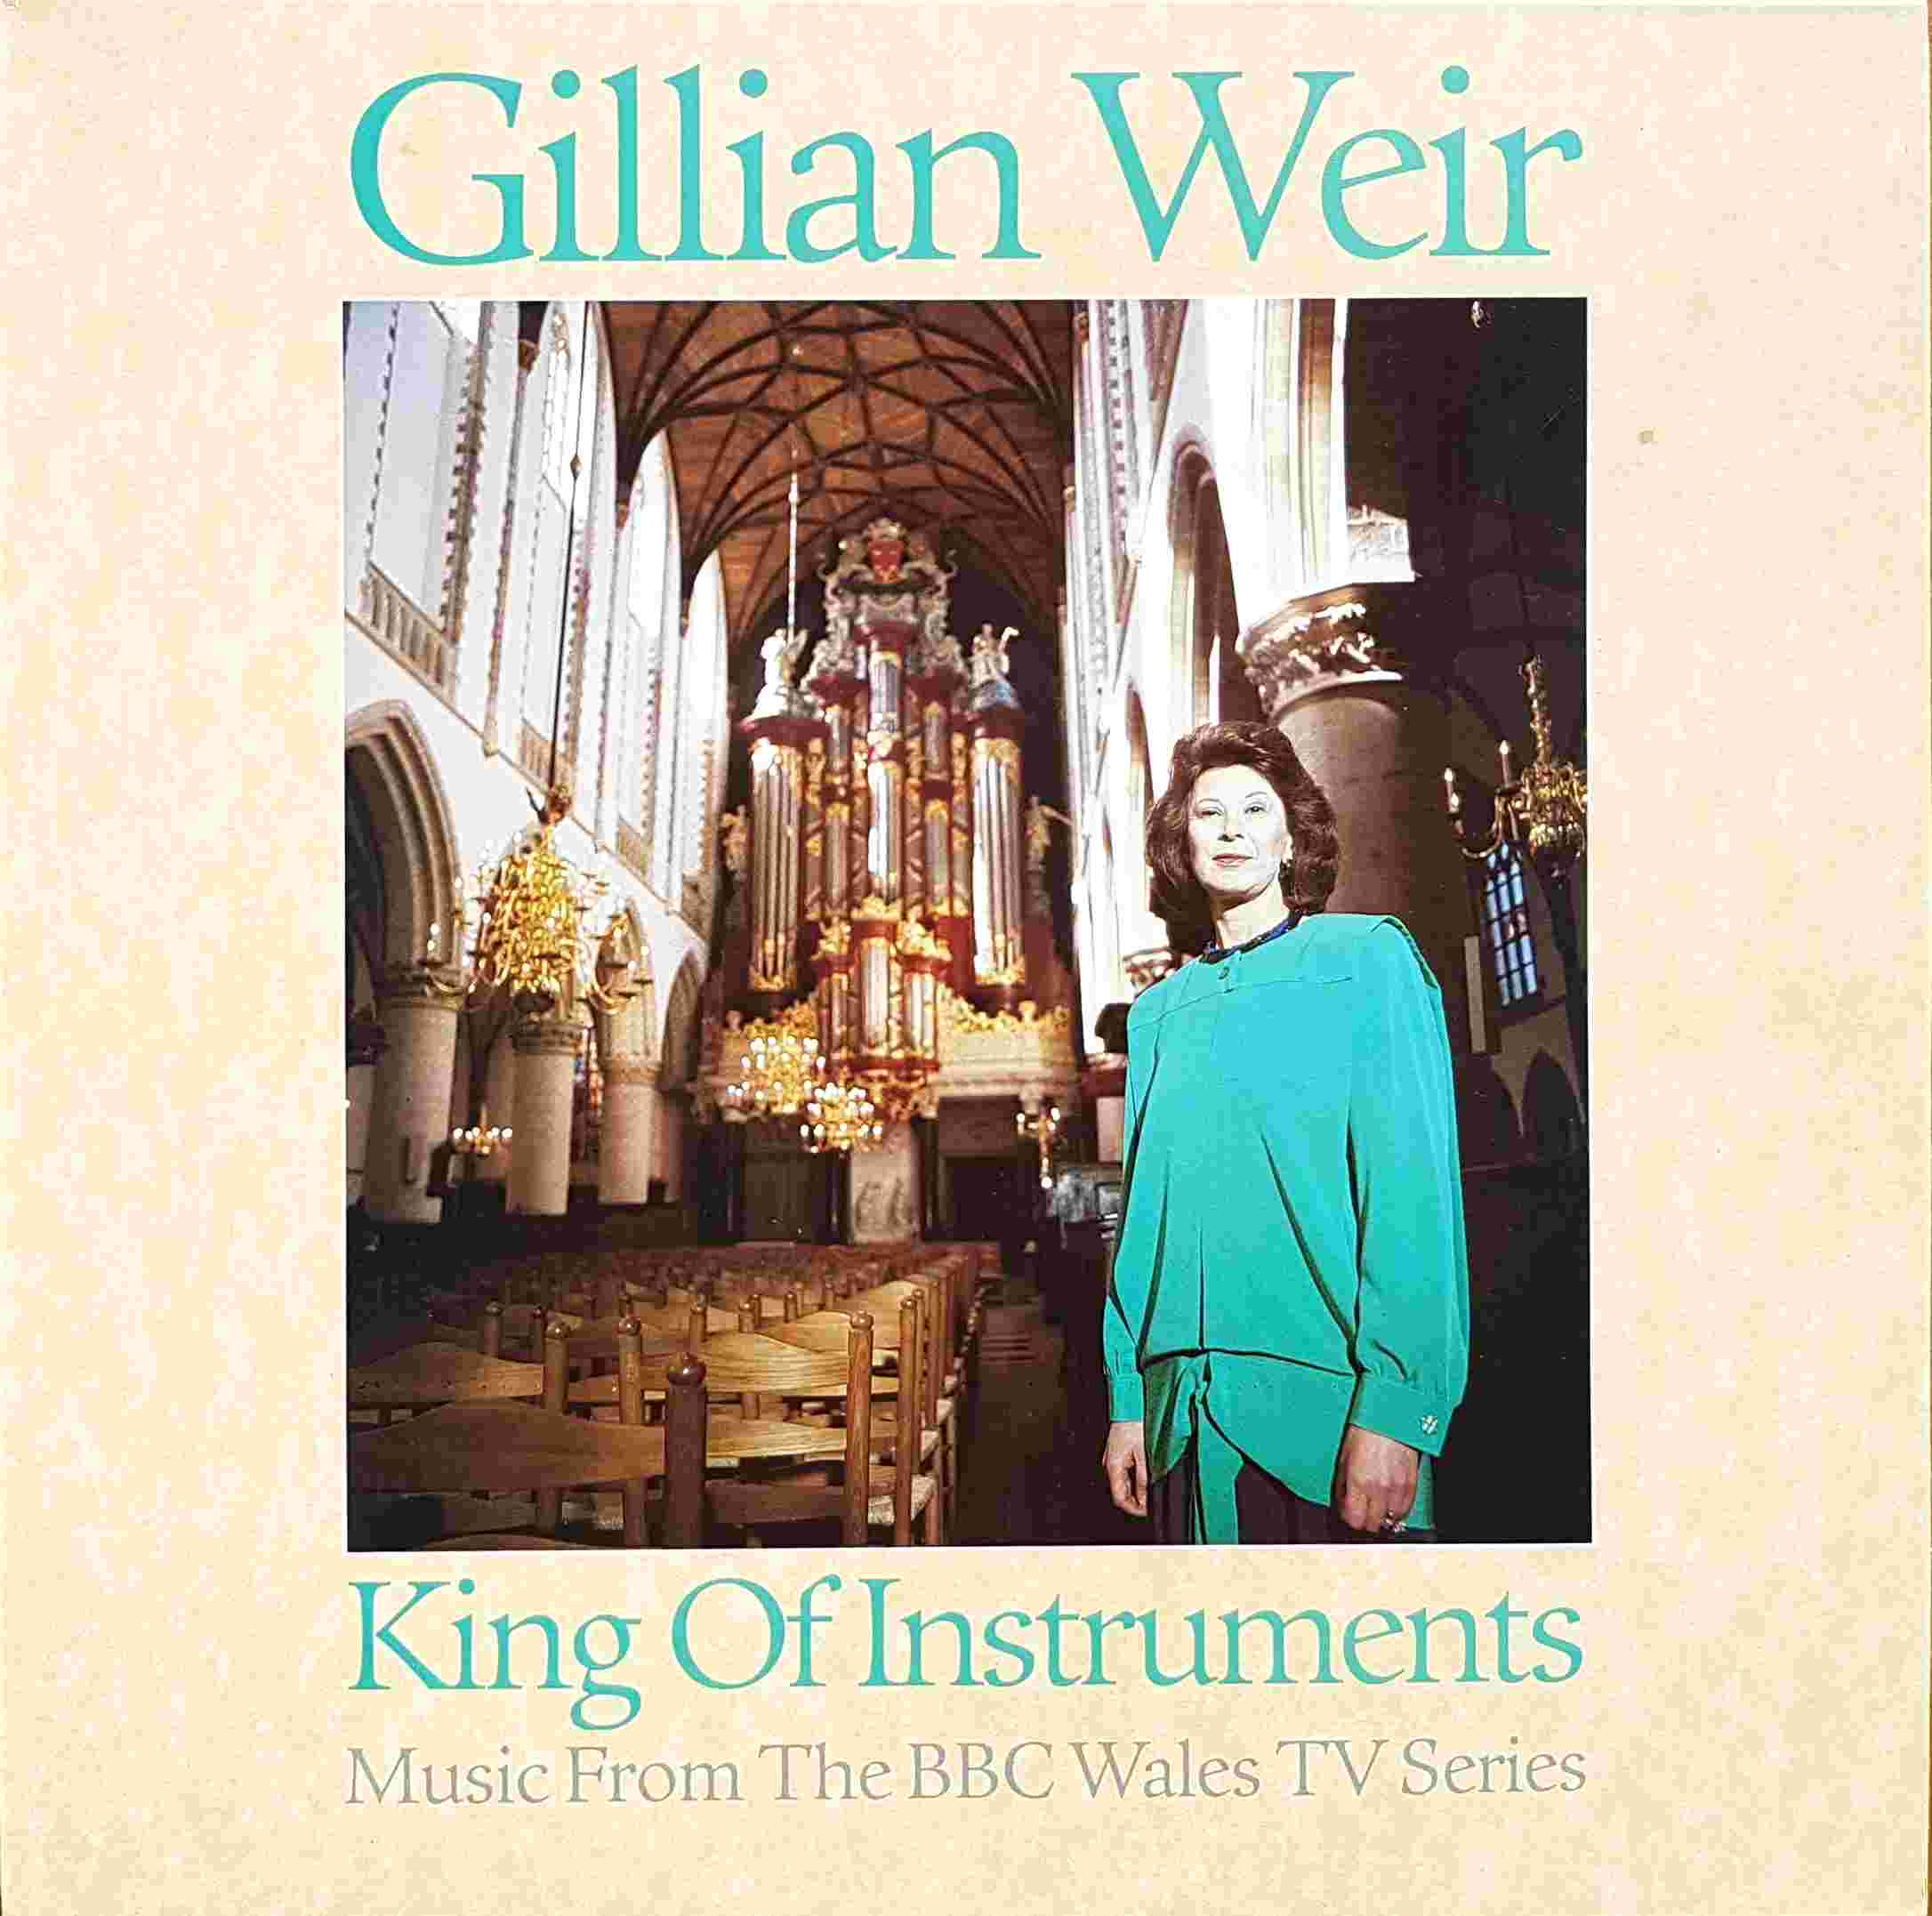 Picture of REN 678 Wings of instruments - Gillian Weir by artist Gillian Weir from the BBC albums - Records and Tapes library